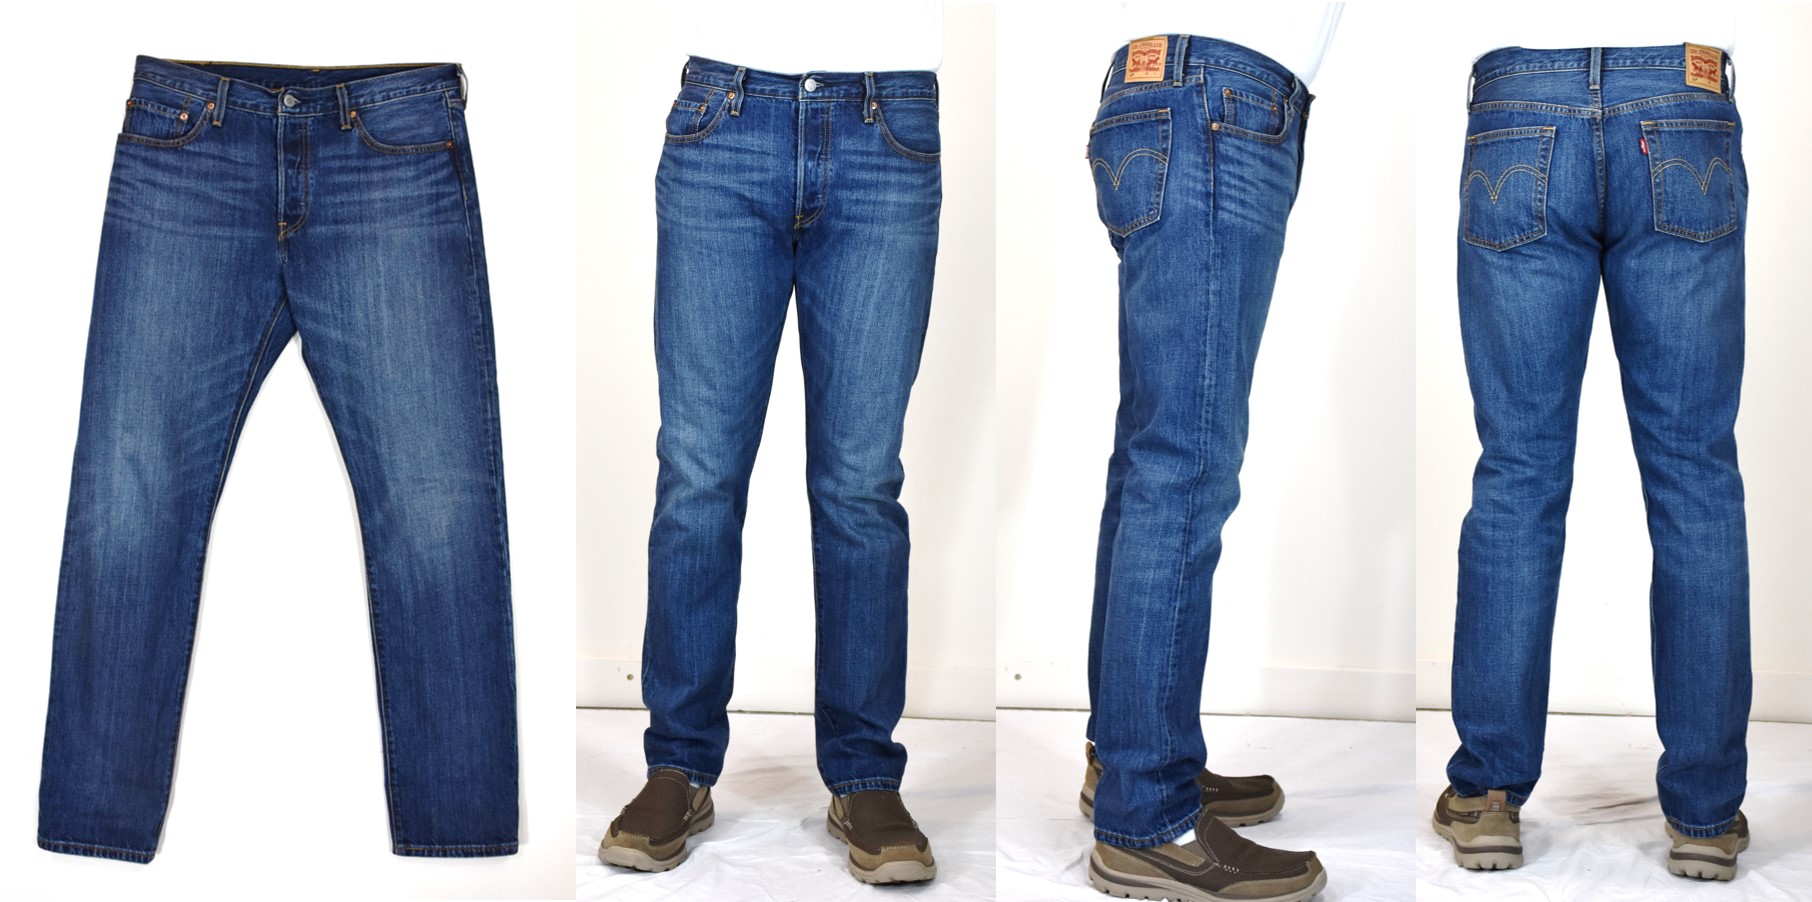 Are Levi’s Jeans Unisex? - THE JEANS BLOG